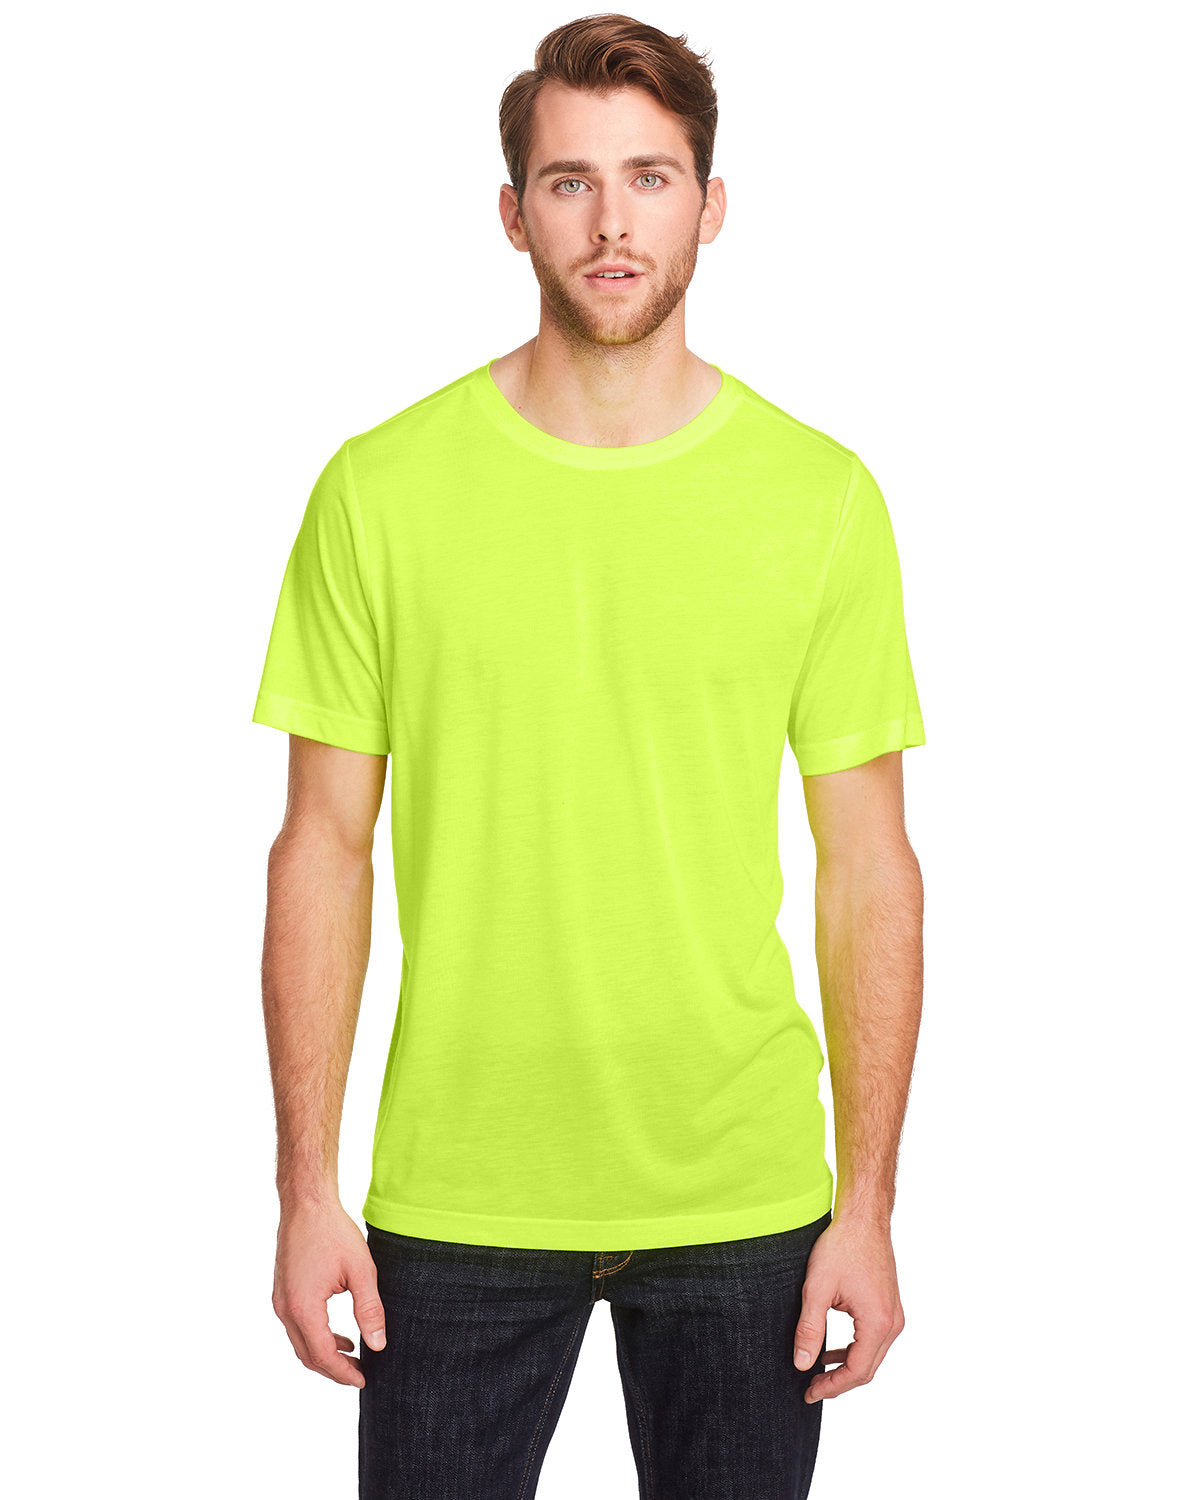 CE111T-CORE365-8Y-SAFETYYELLOW-L-Tall